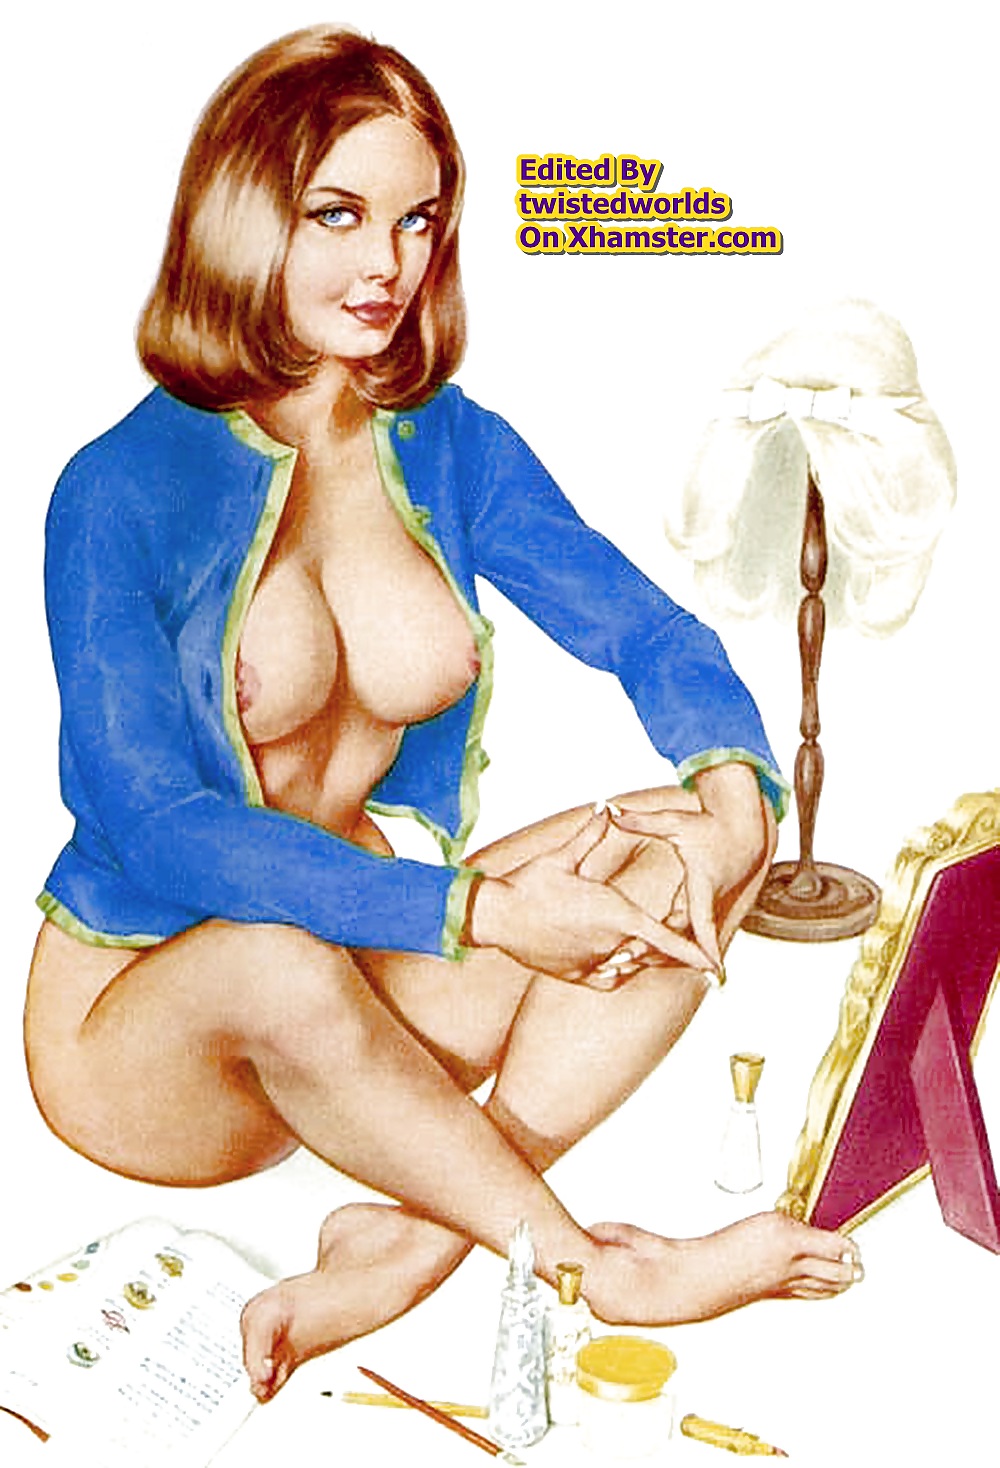 Vintage pinup girls new & old erotica by twistedworlds
 #16556292